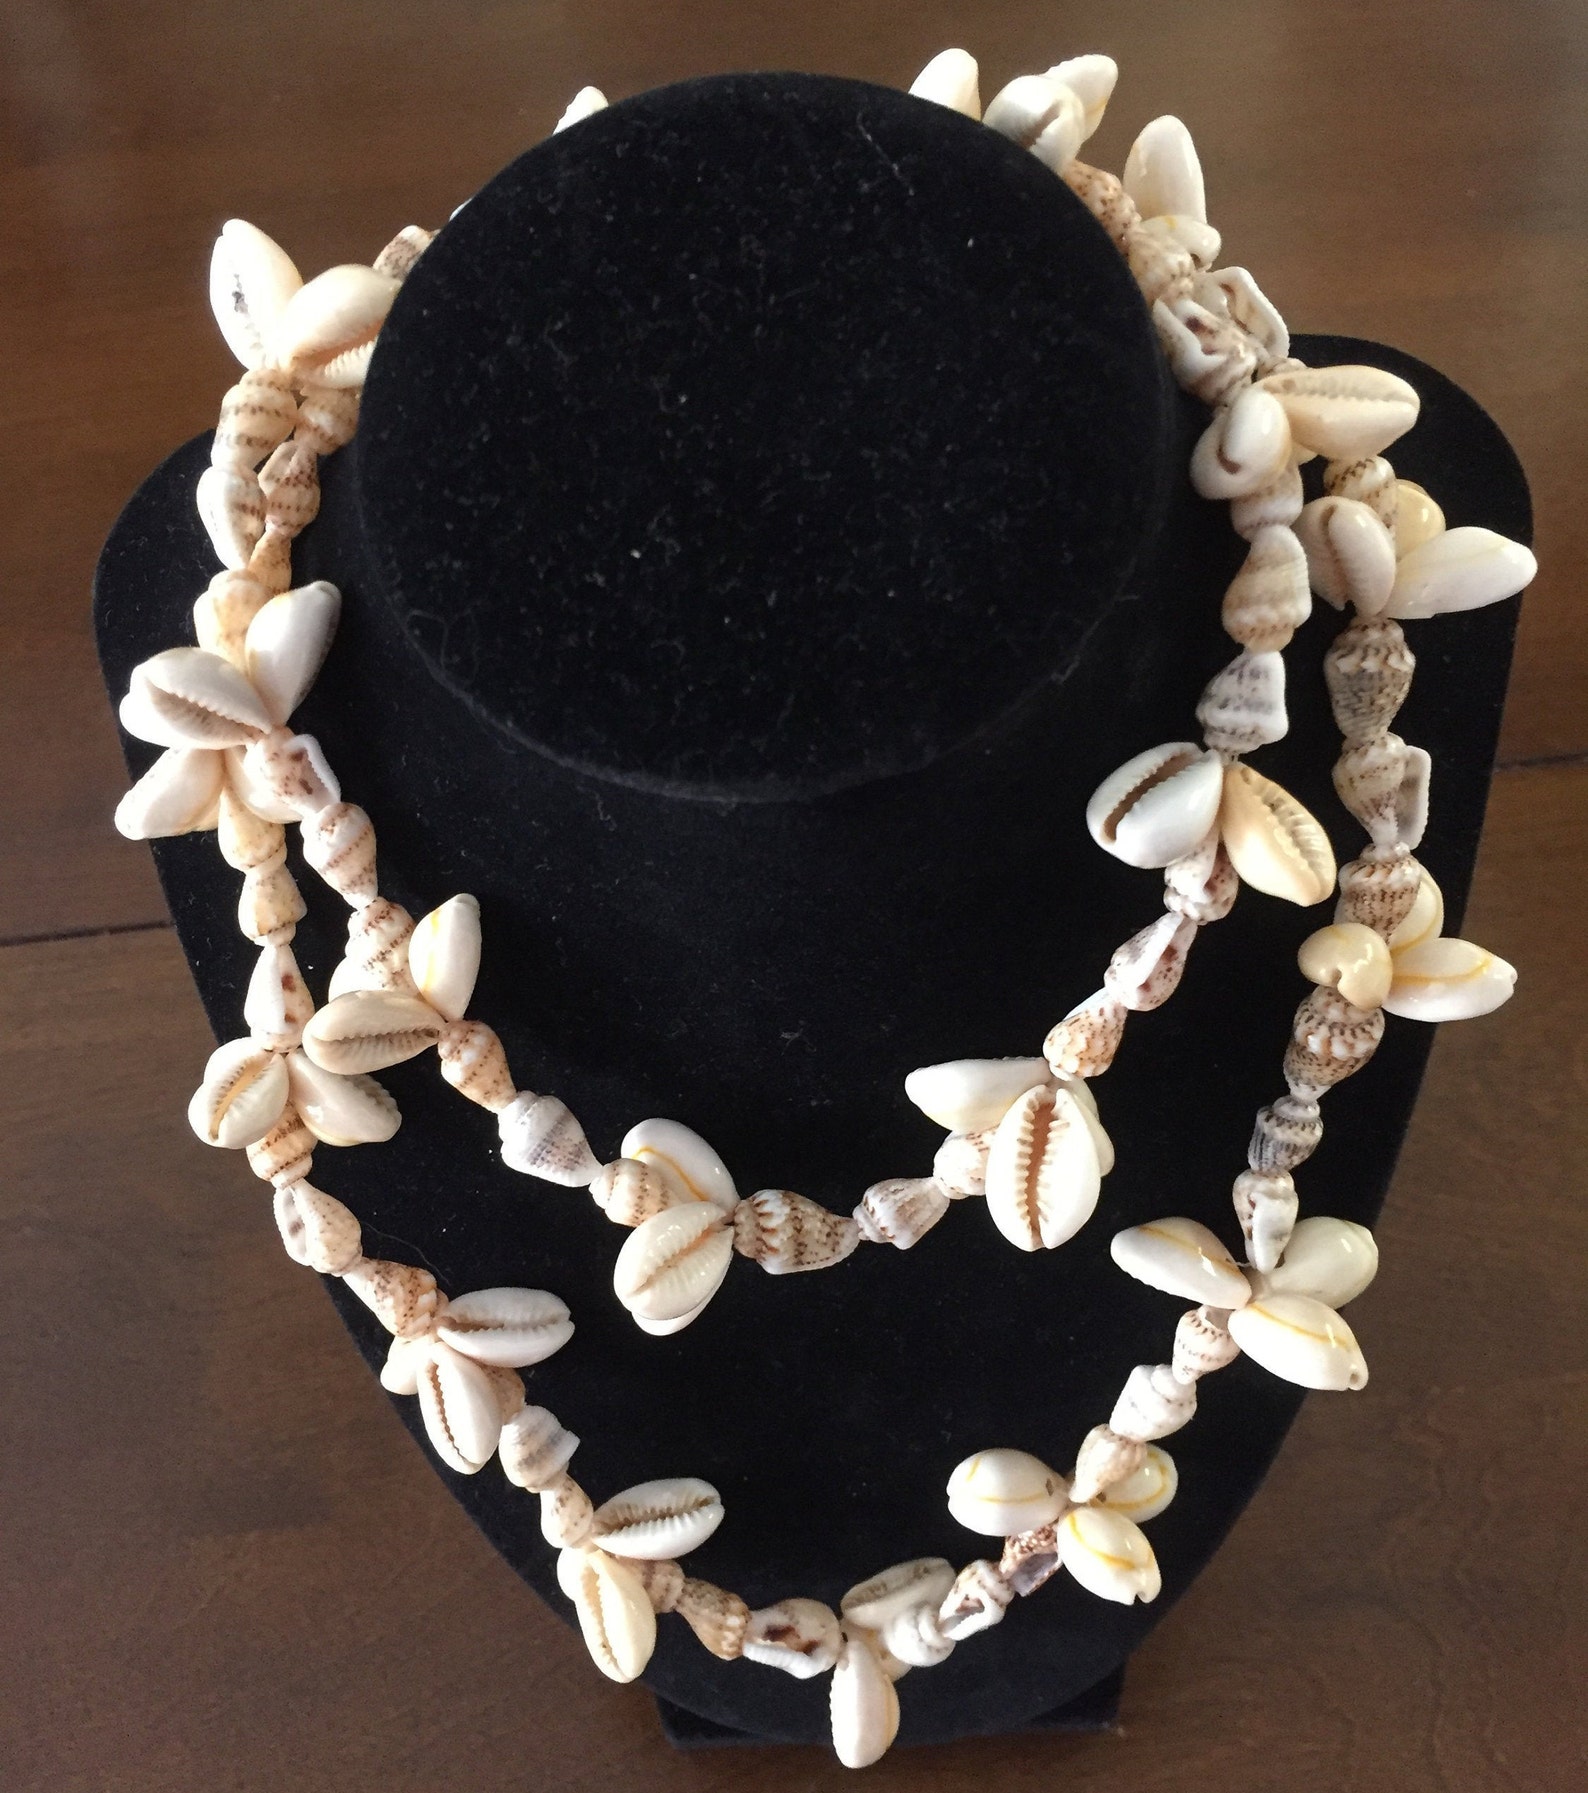 Vintage Seminole Indian Cowrie and Conch Shell Necklace - Etsy